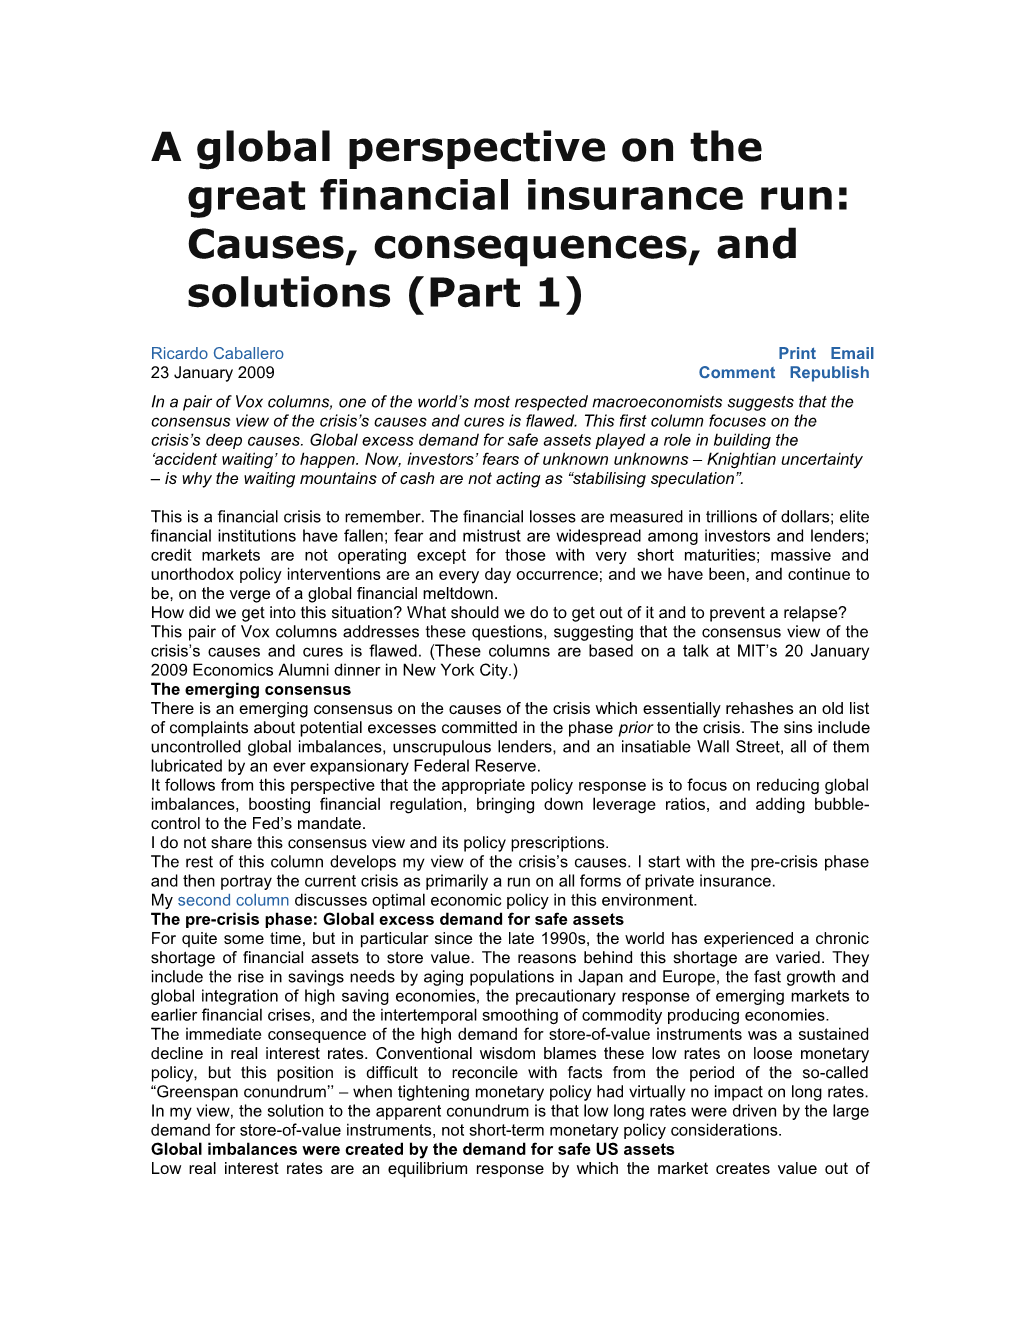 A Global Perspective on the Great Financial Insurance Run: Causes, Consequences, and Solutions